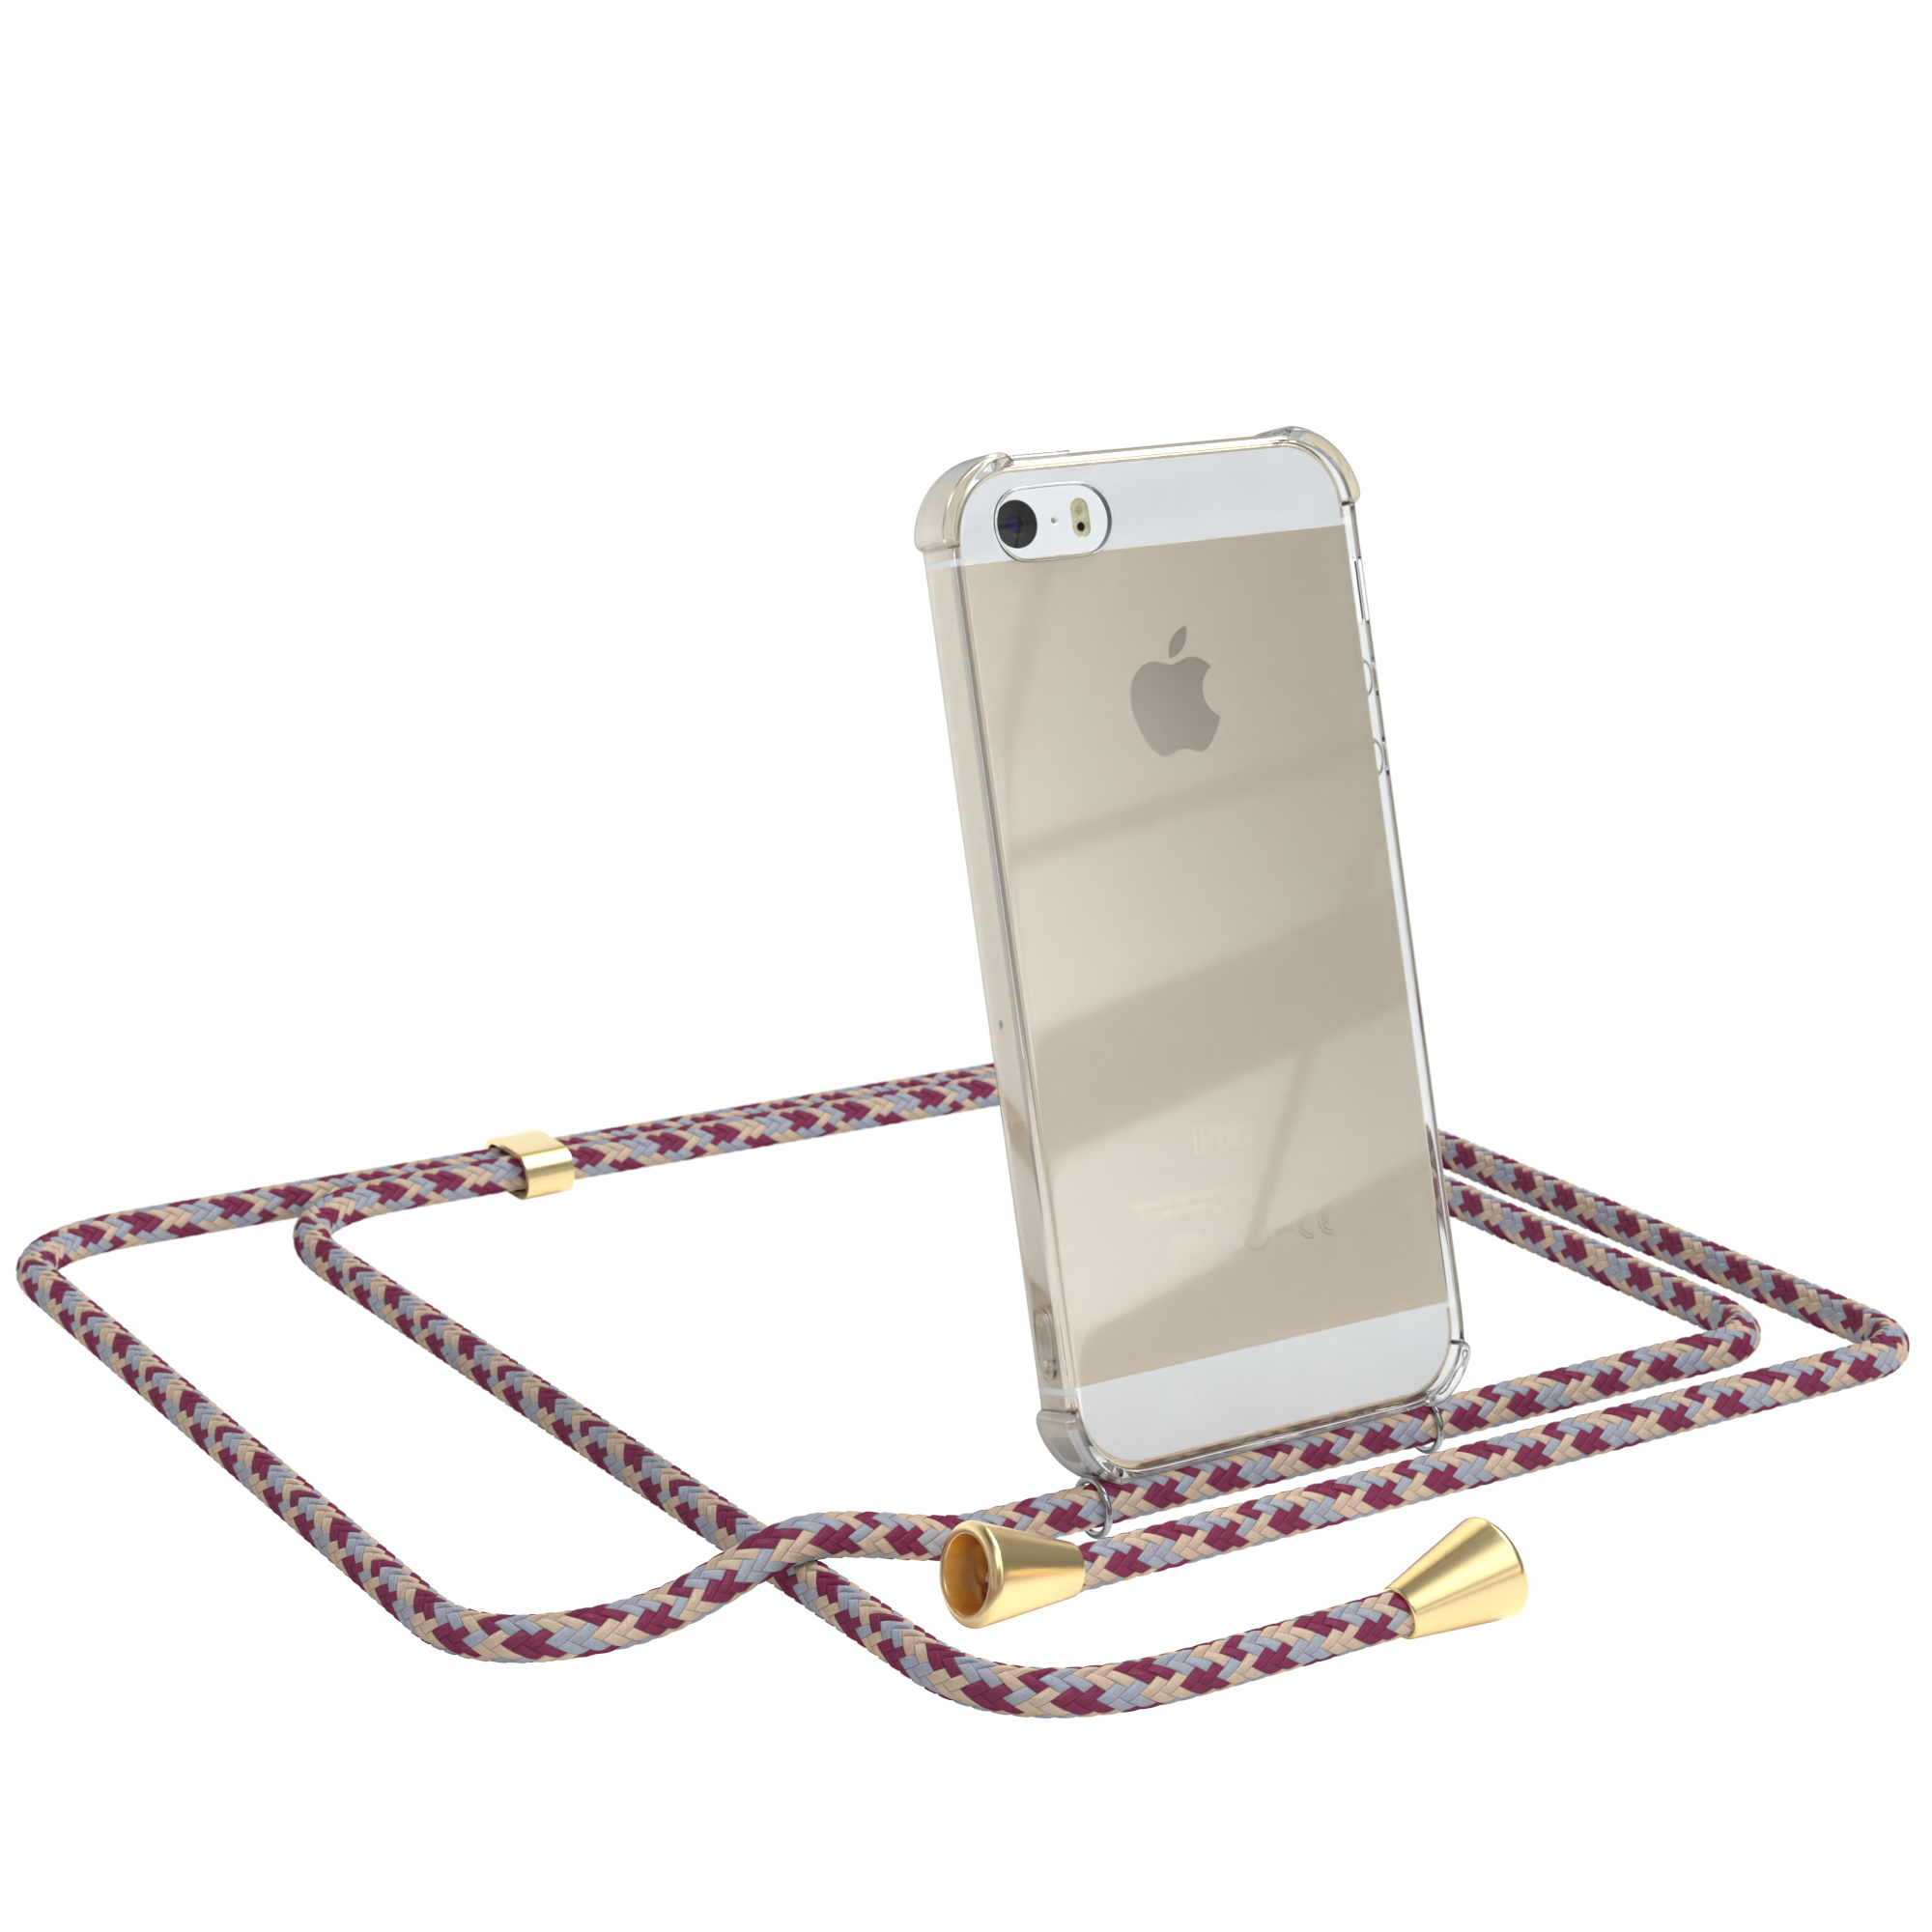 EAZY CASE Clear Cover iPhone Gold Umhängetasche, Rot 5 Beige 5S, / Apple, Umhängeband, mit iPhone Clips / SE Camouflage 2016